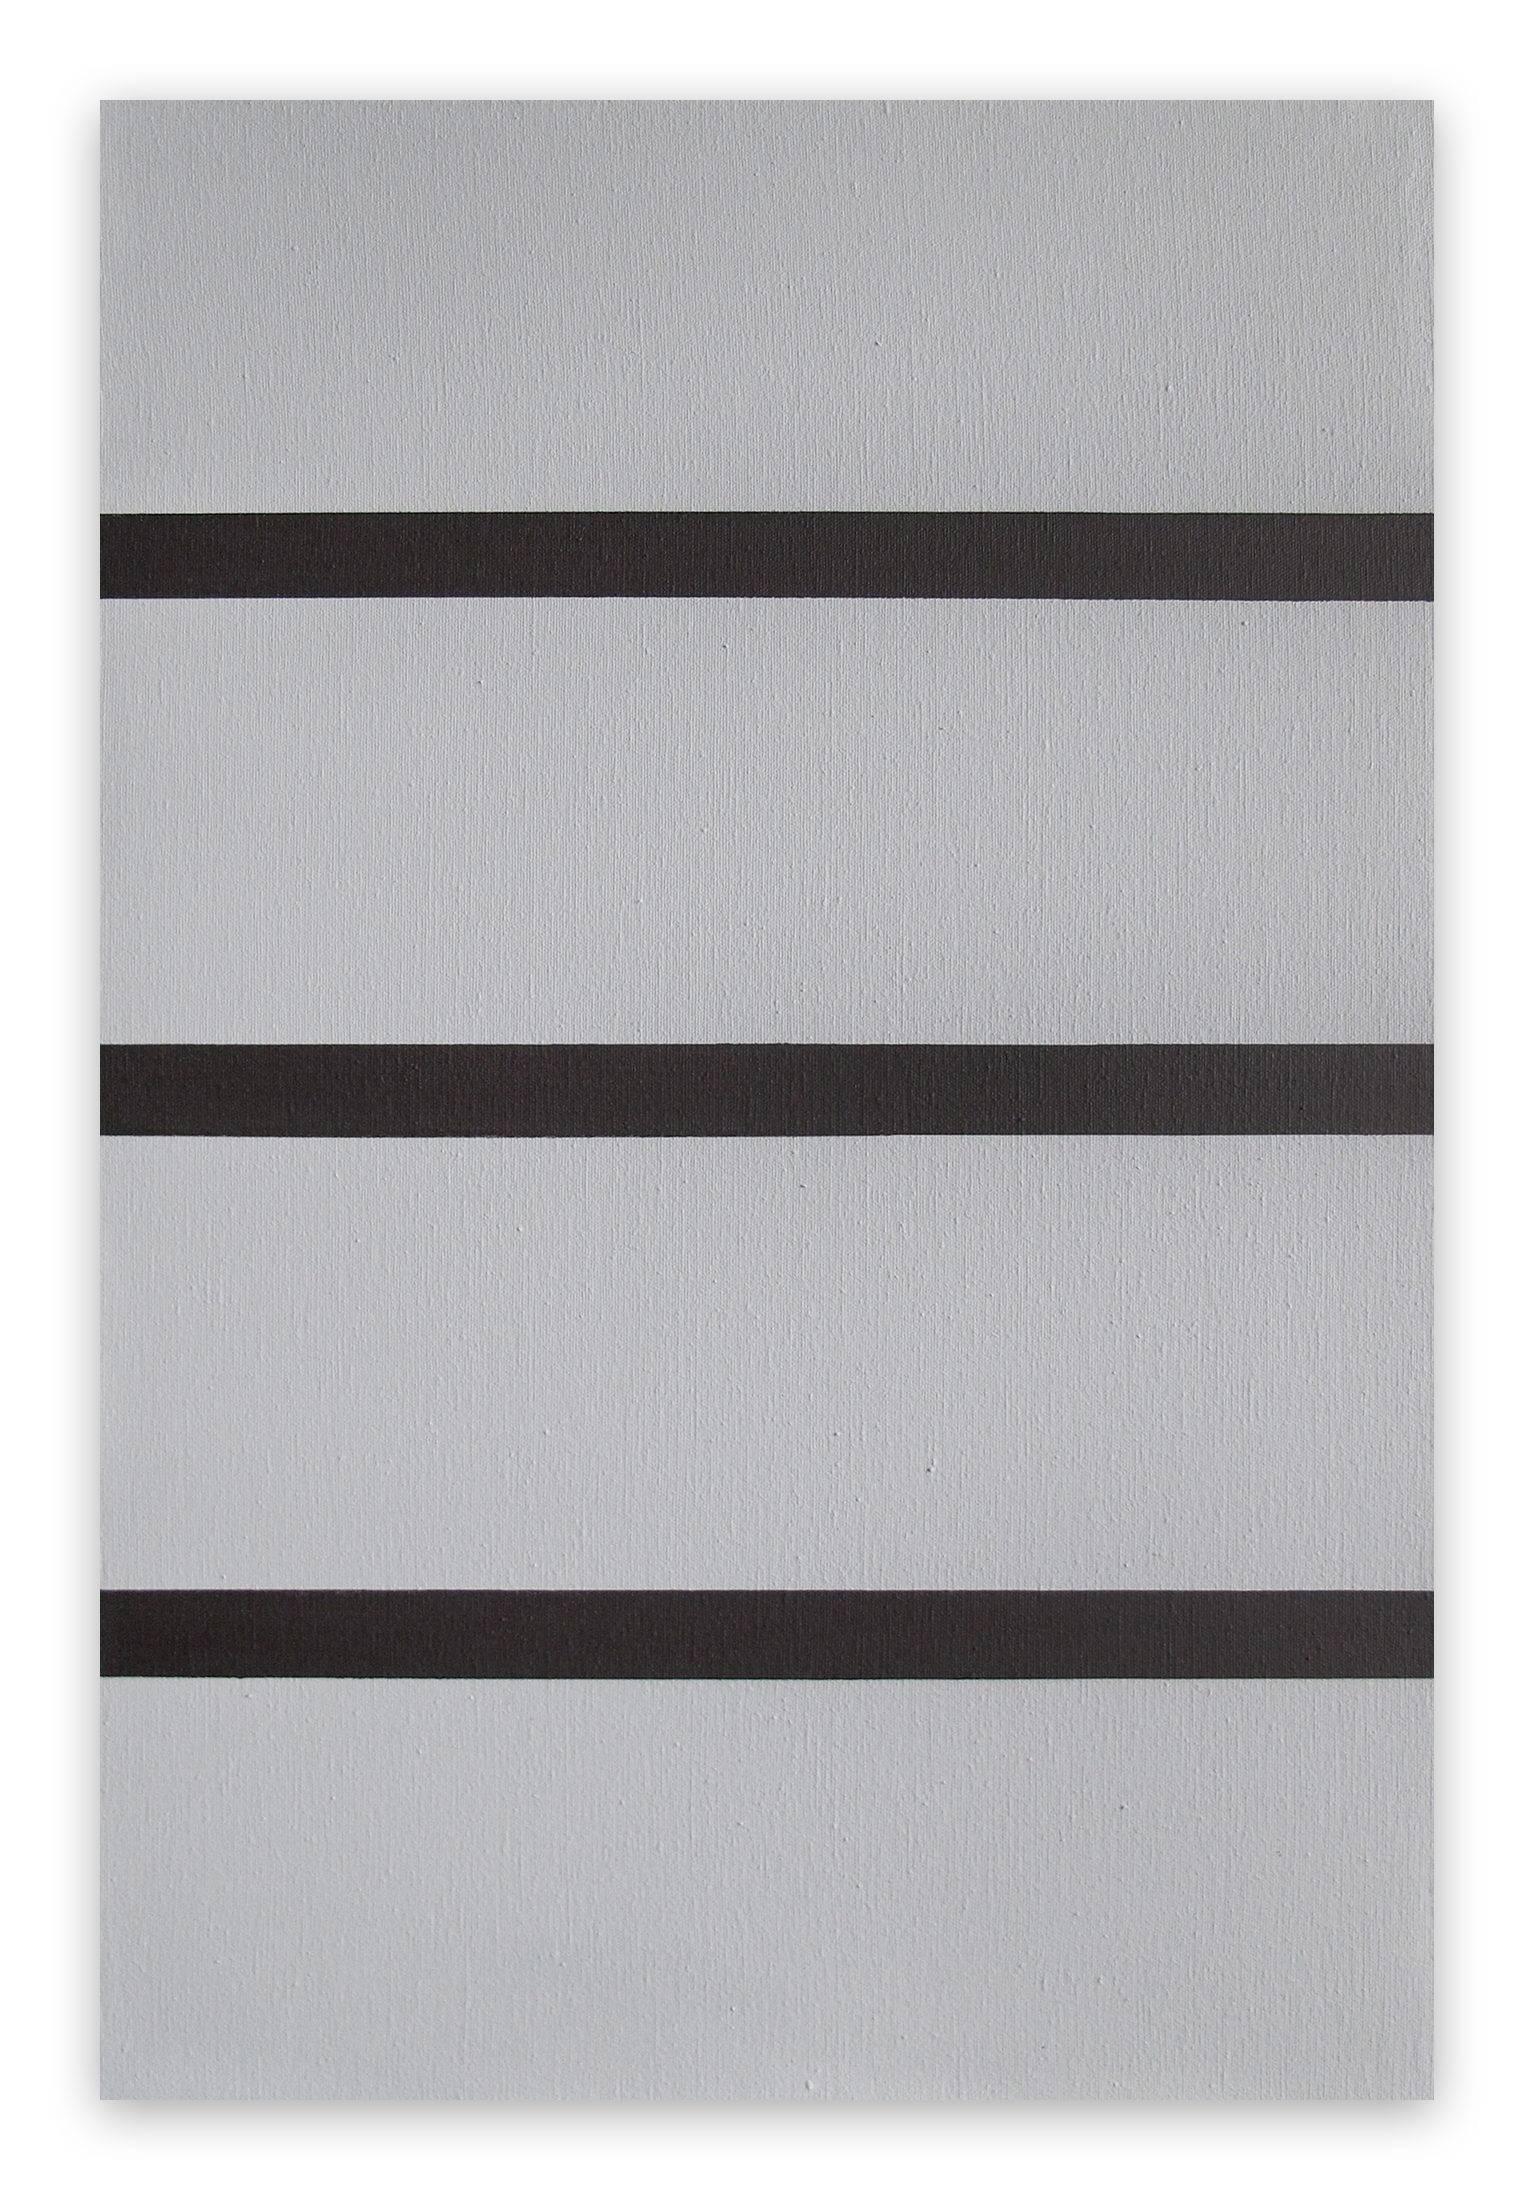 Untitled 1 (Grey/Brown) 2016 (Abstract Painting)

Acrylic on cotton - Unframed

This work is one of four similar works consisting of acrylic painted cotton of the same size.

The brown lines are separating the grey parts into congruent parts.

Based